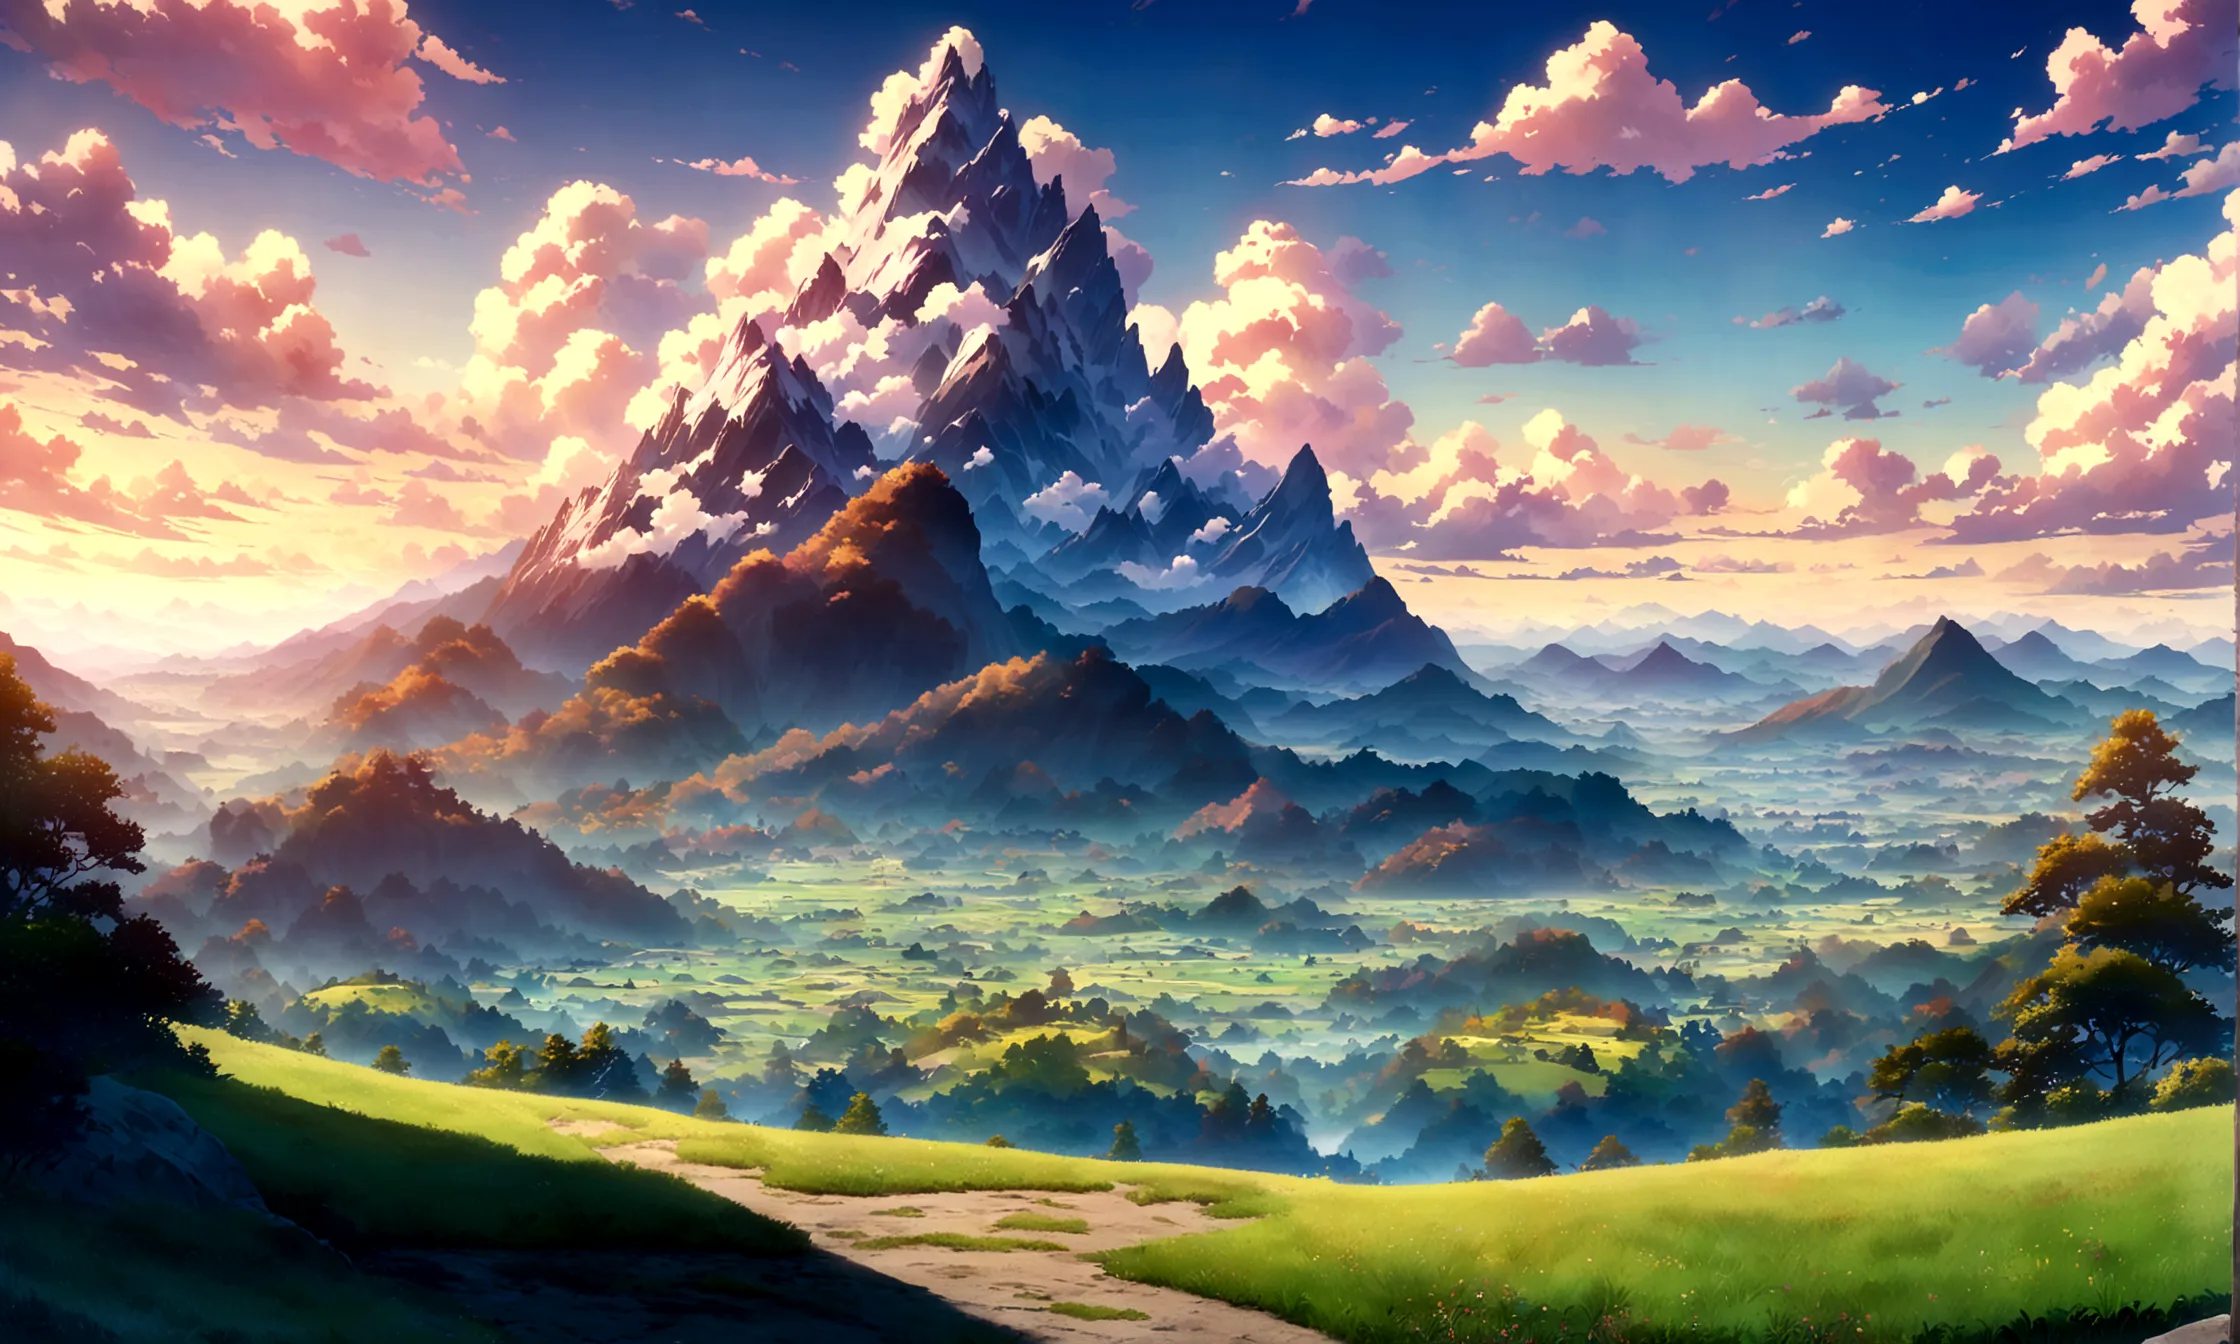 
japanese anime - style painting of a beautiful day grassy field with towering mountains , blue cloudy sky,anime countryside lan...